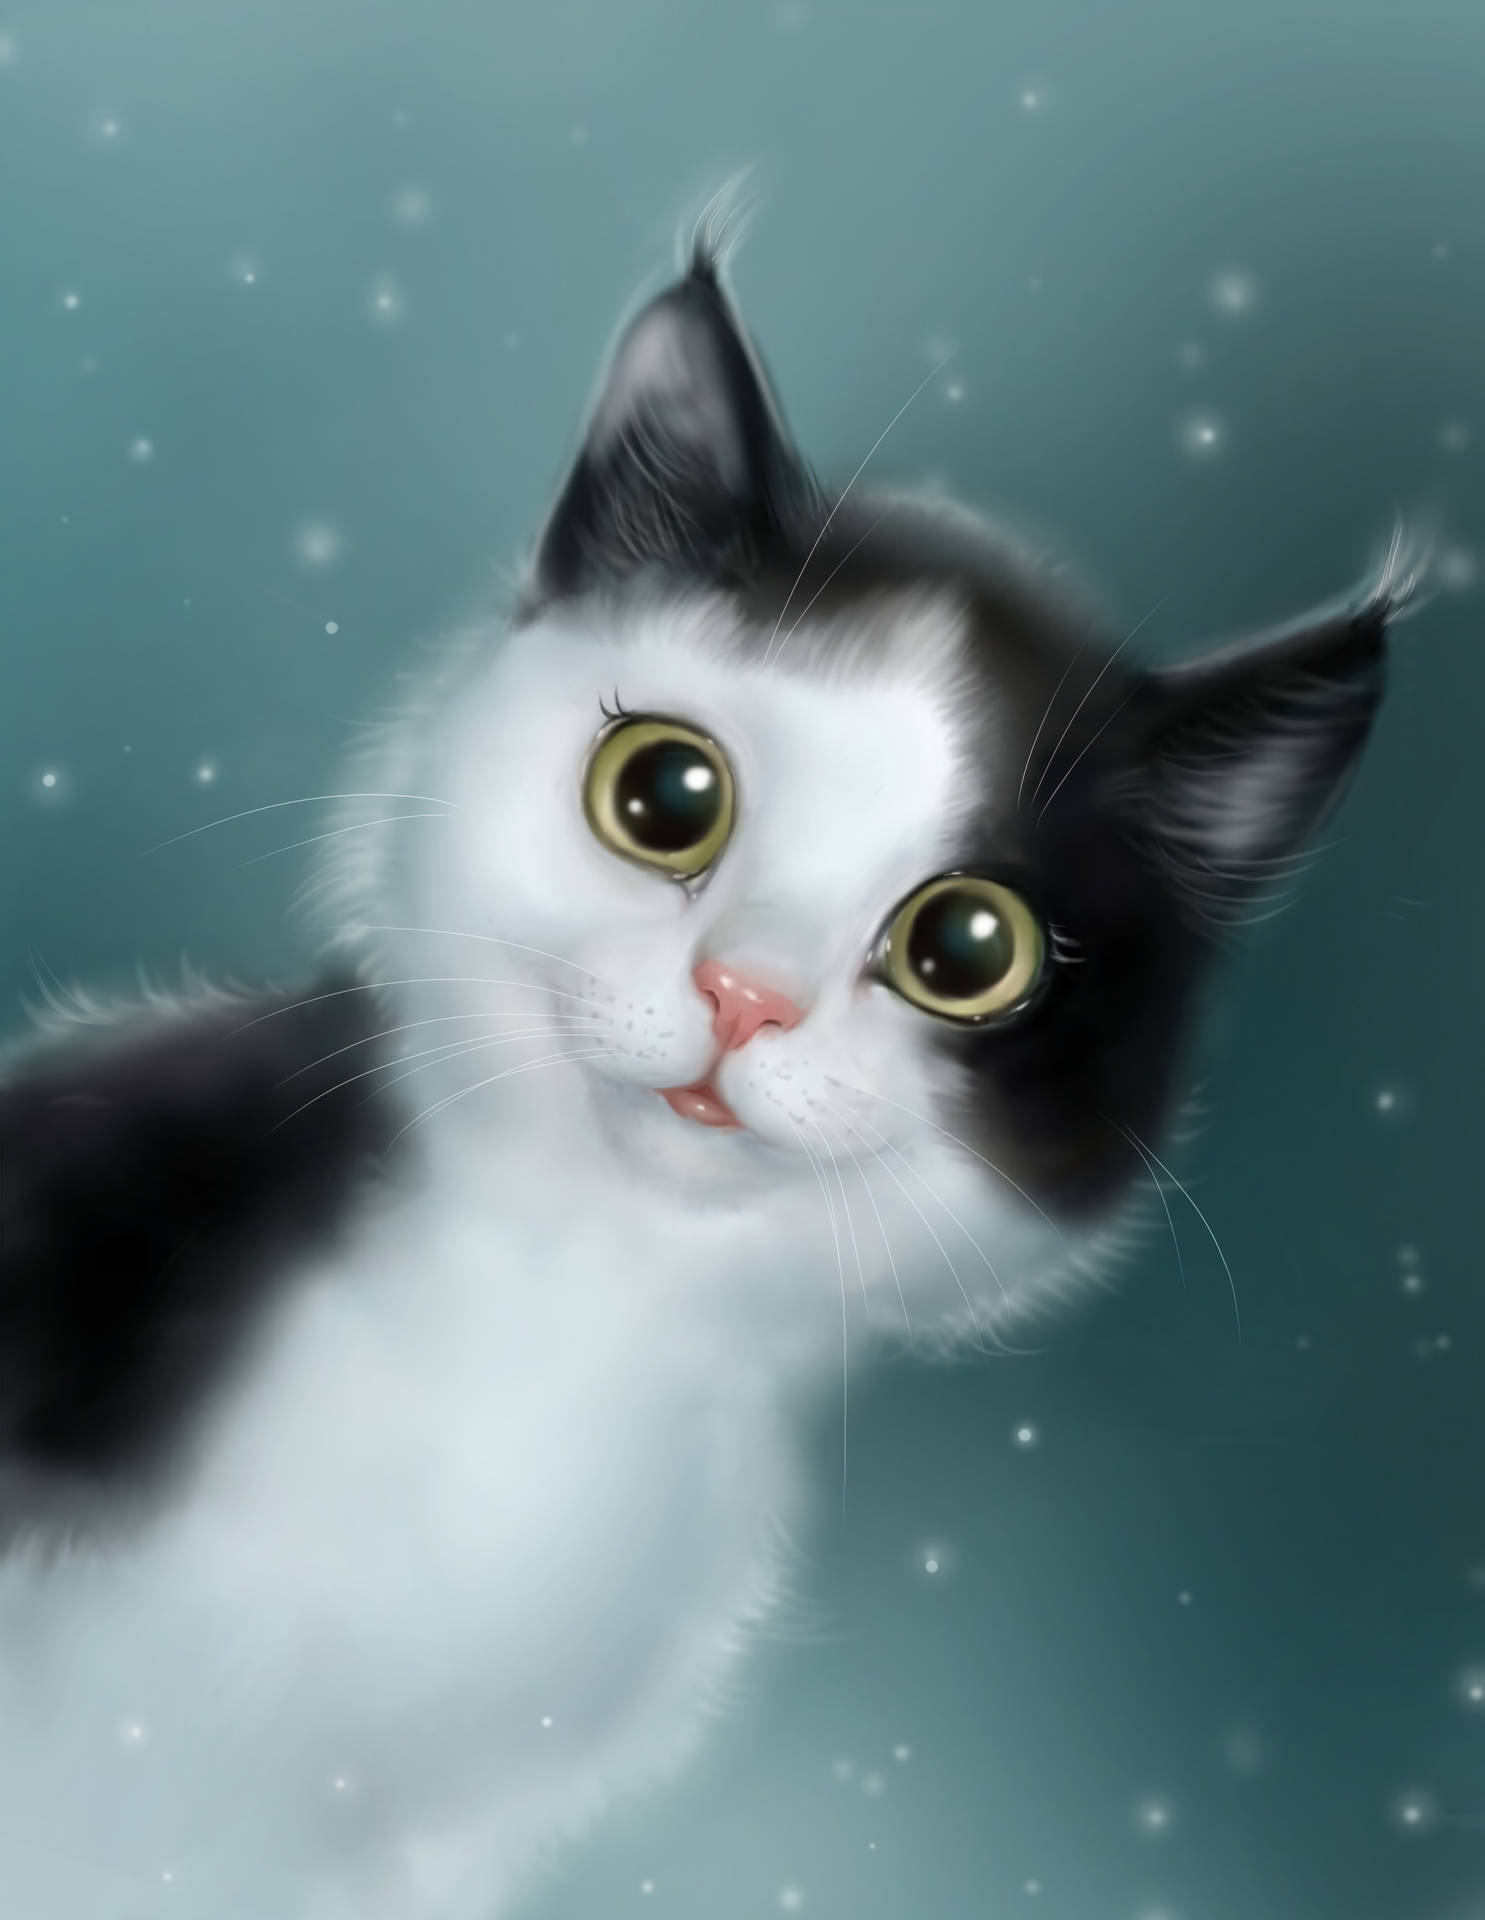 Soft dynamic painting of a cute white cat wallpaper.